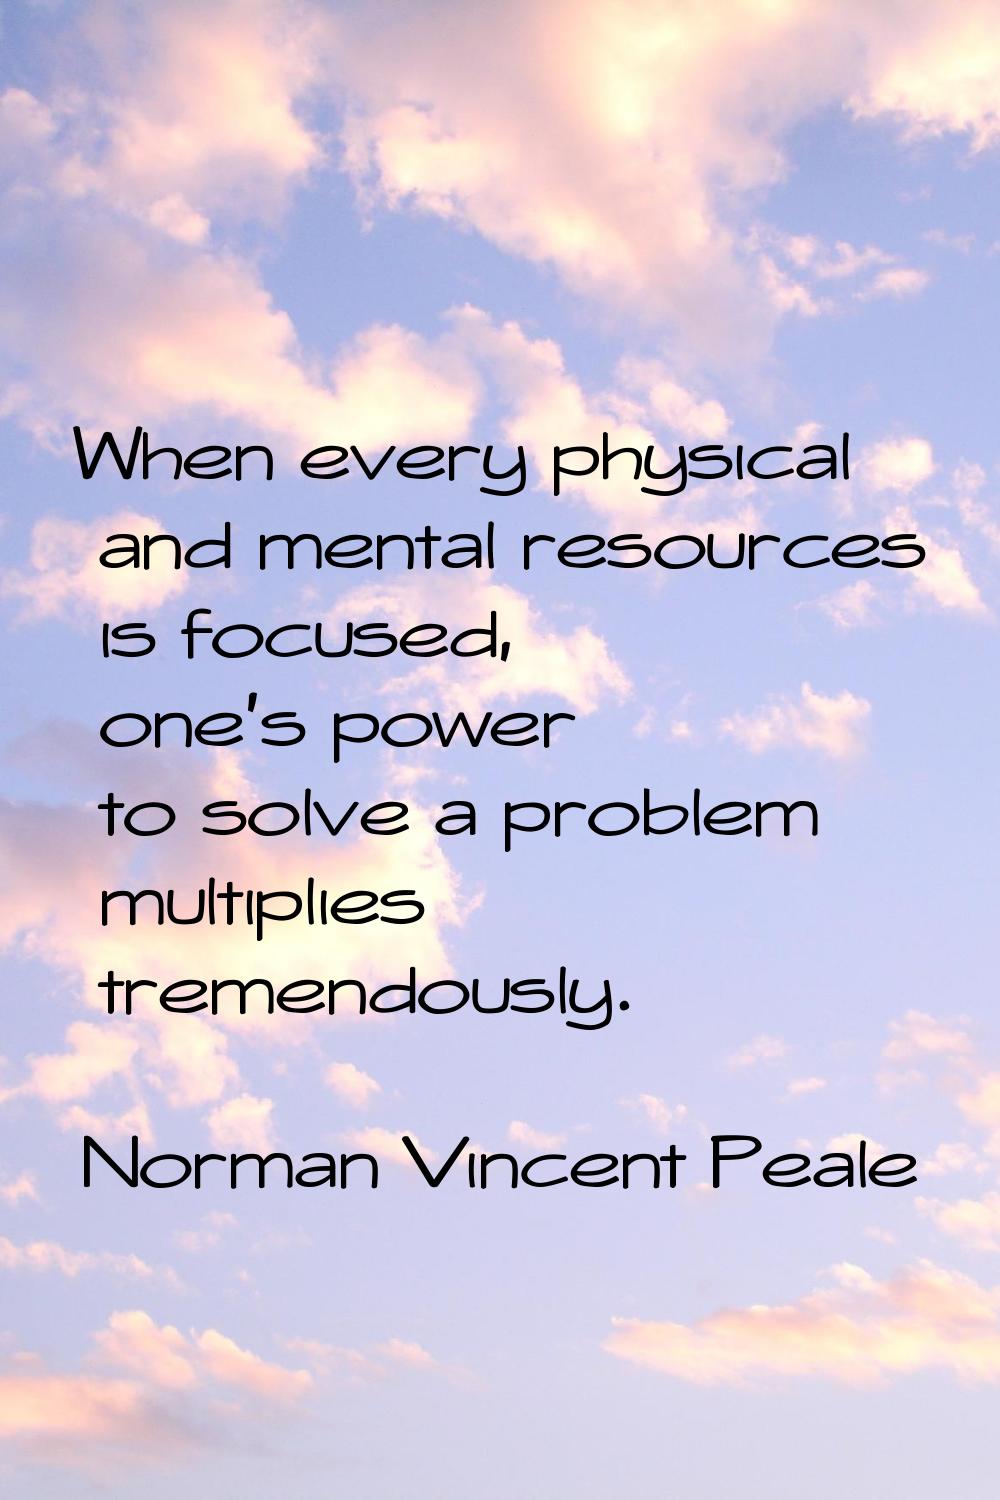 When every physical and mental resources is focused, one's power to solve a problem multiplies trem